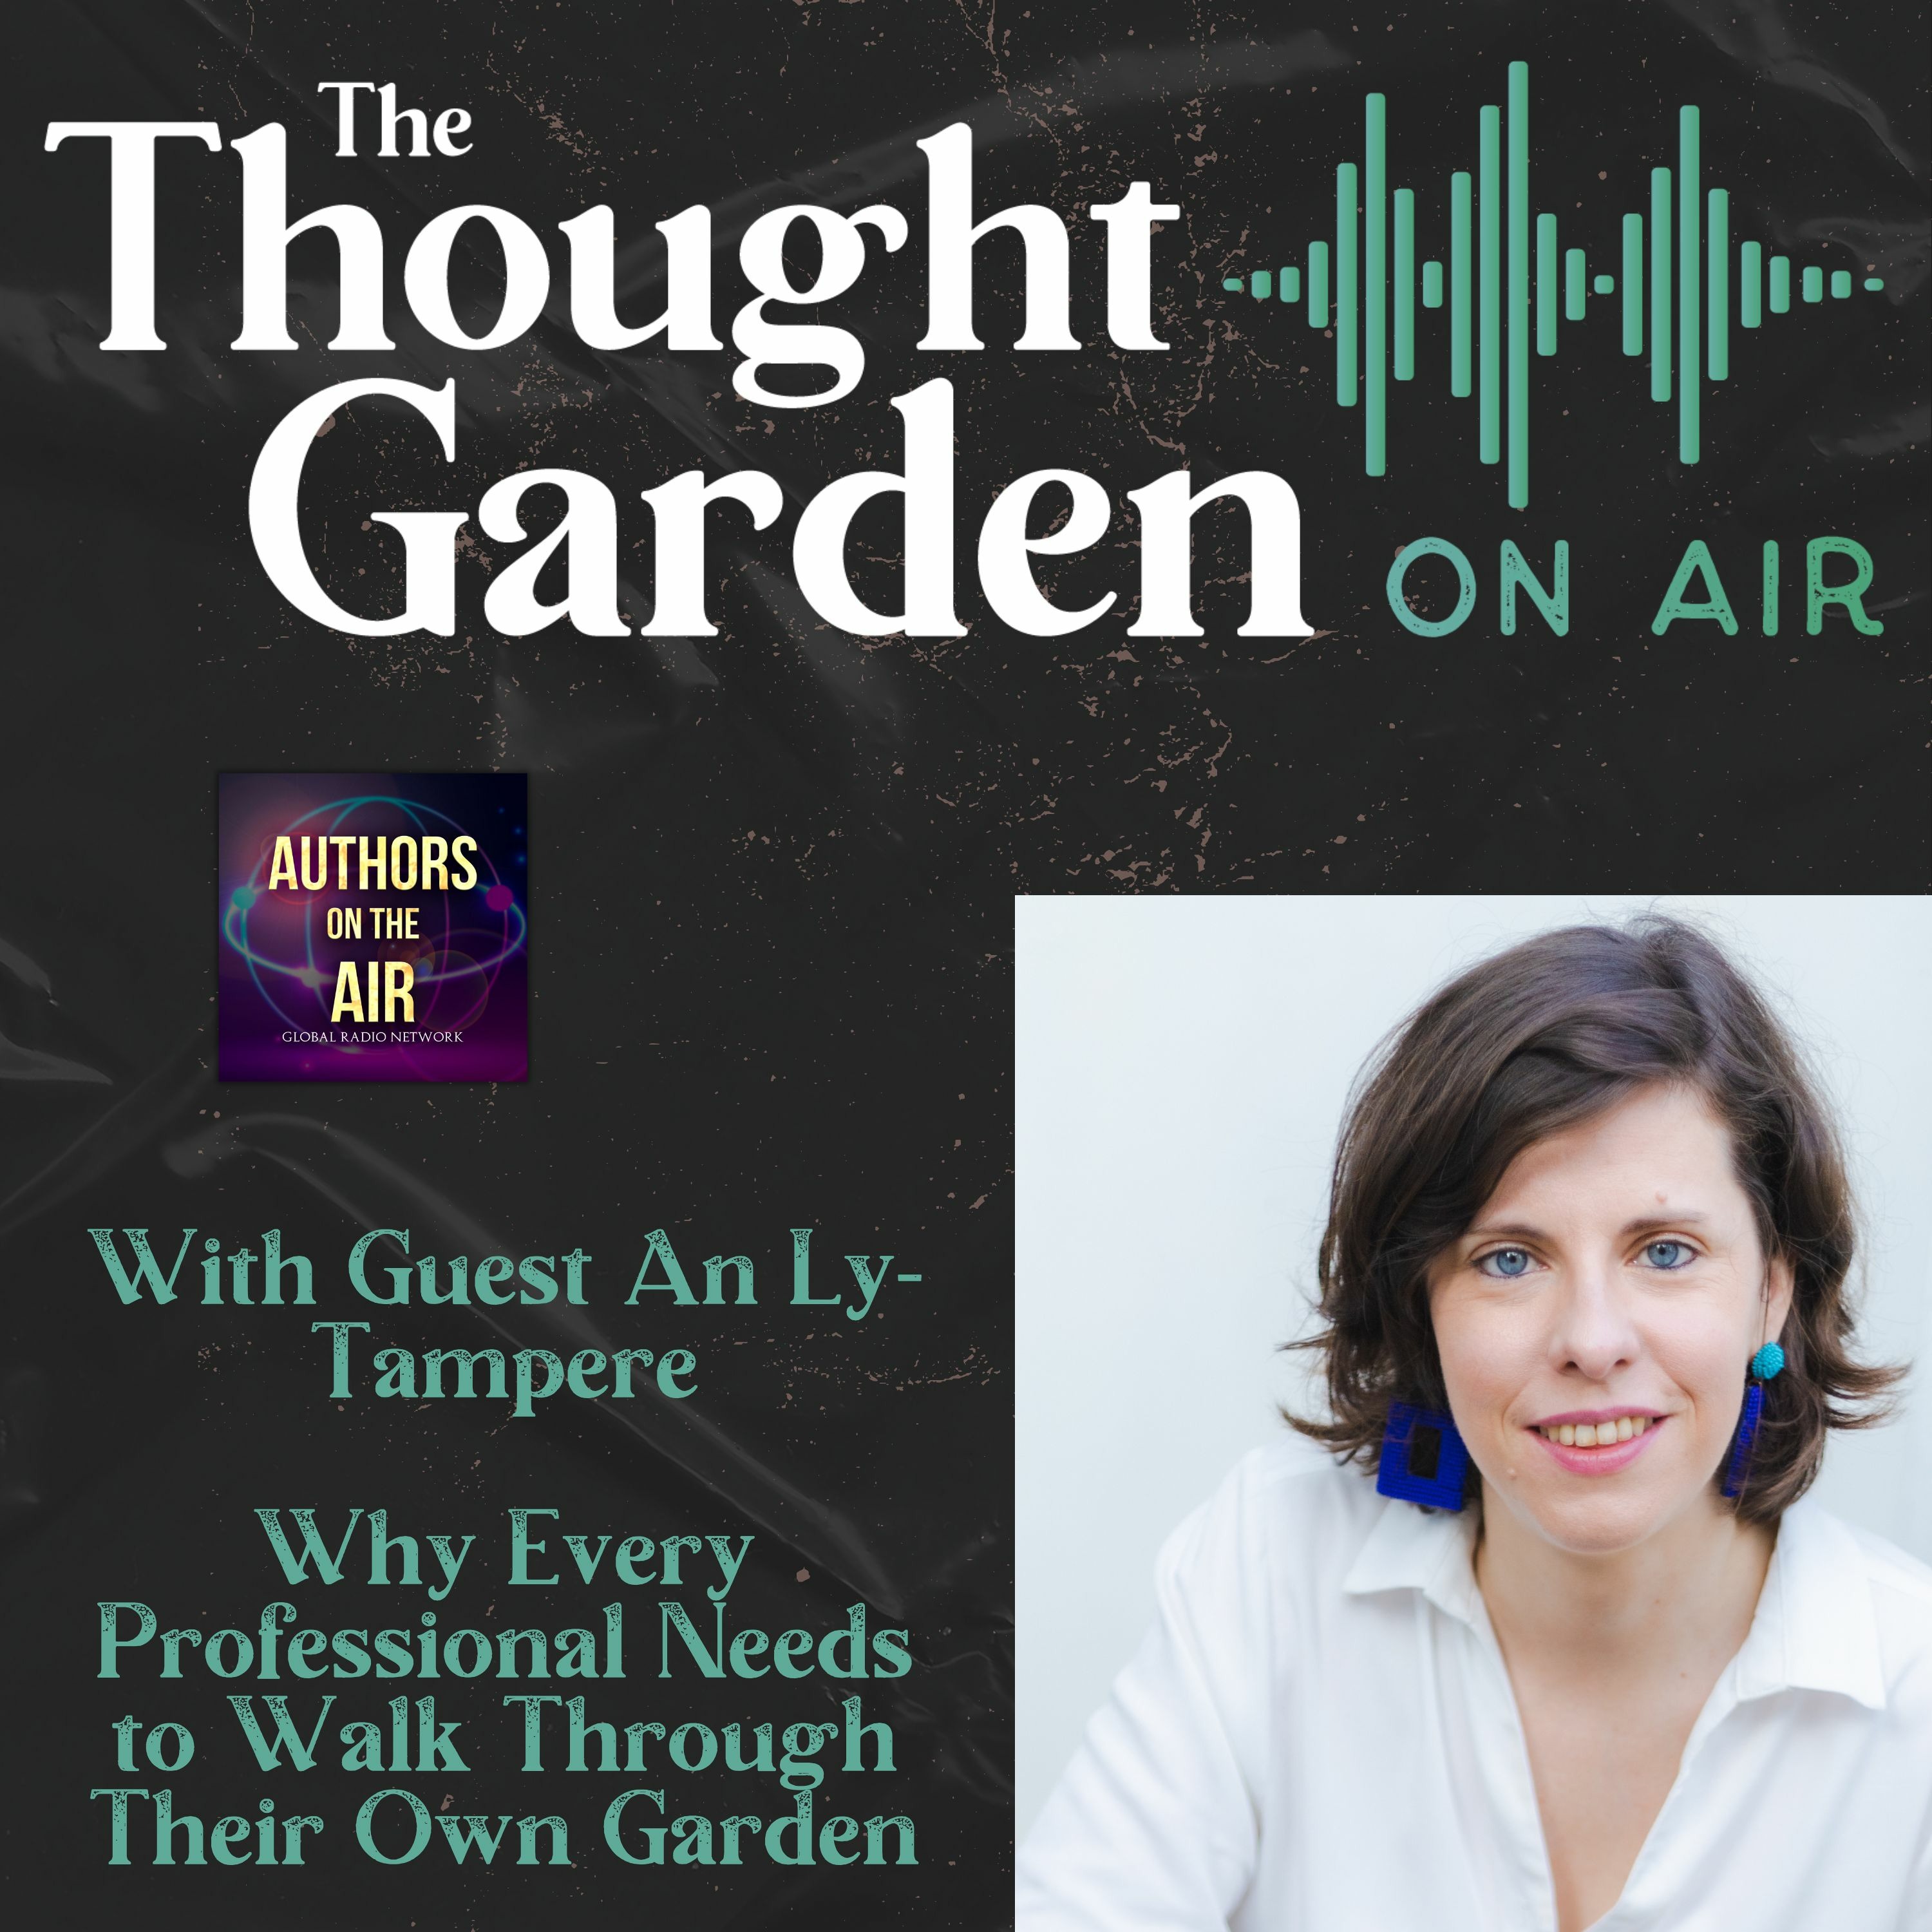 The Thought Garden on Air with An-Ly Tampere -  Walk Through Their Own Garden